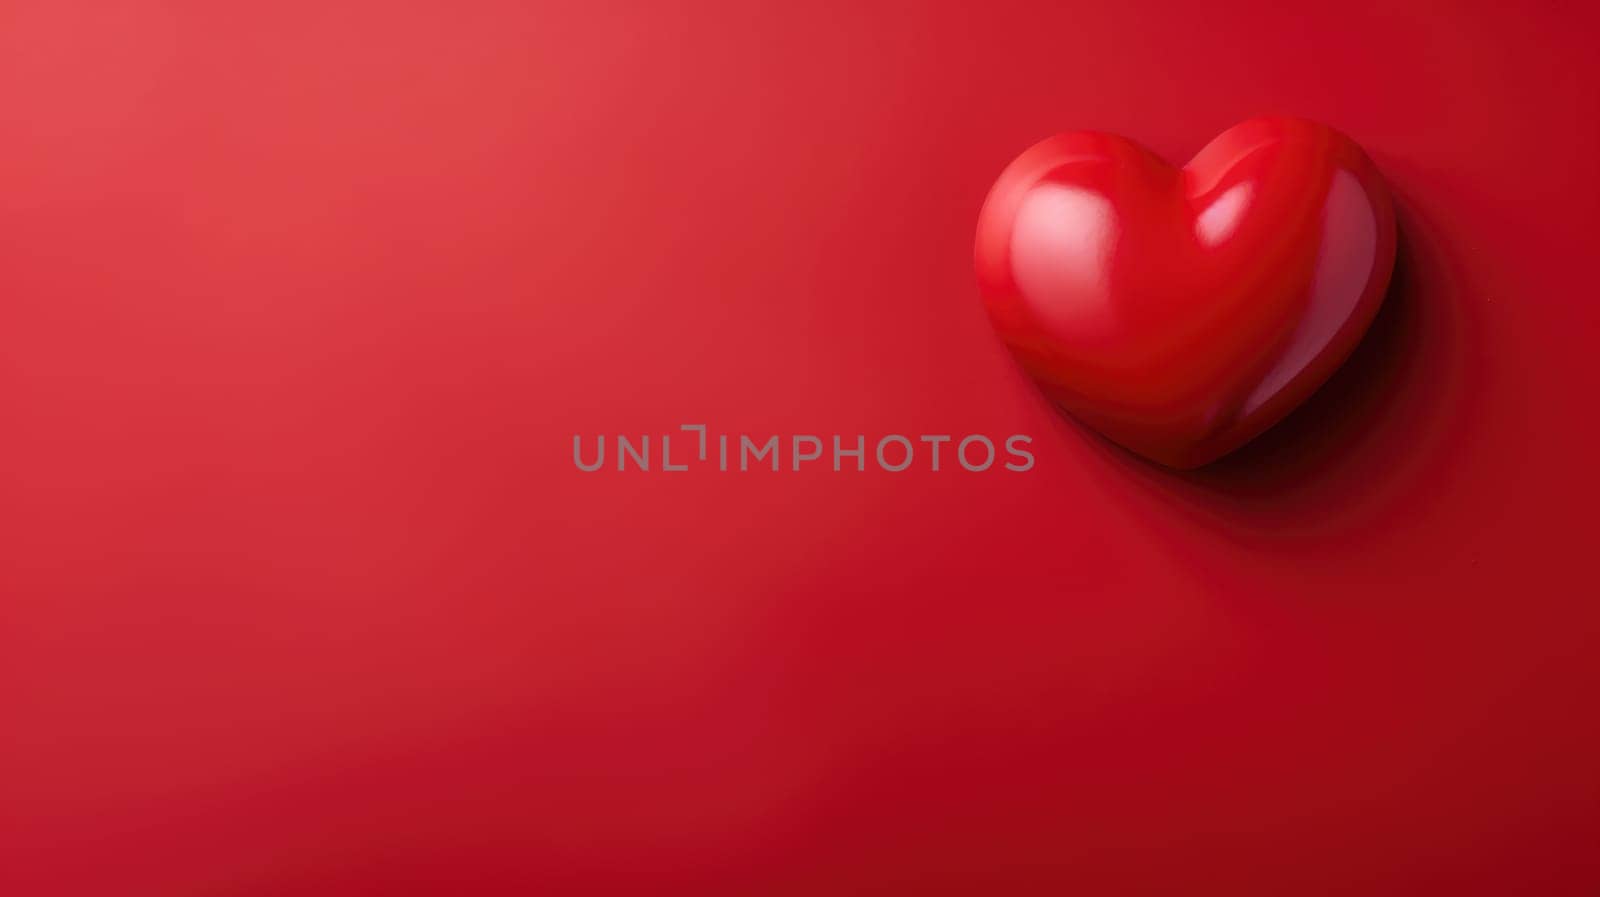 Red soft Heart Shape on red background. Valentines day background